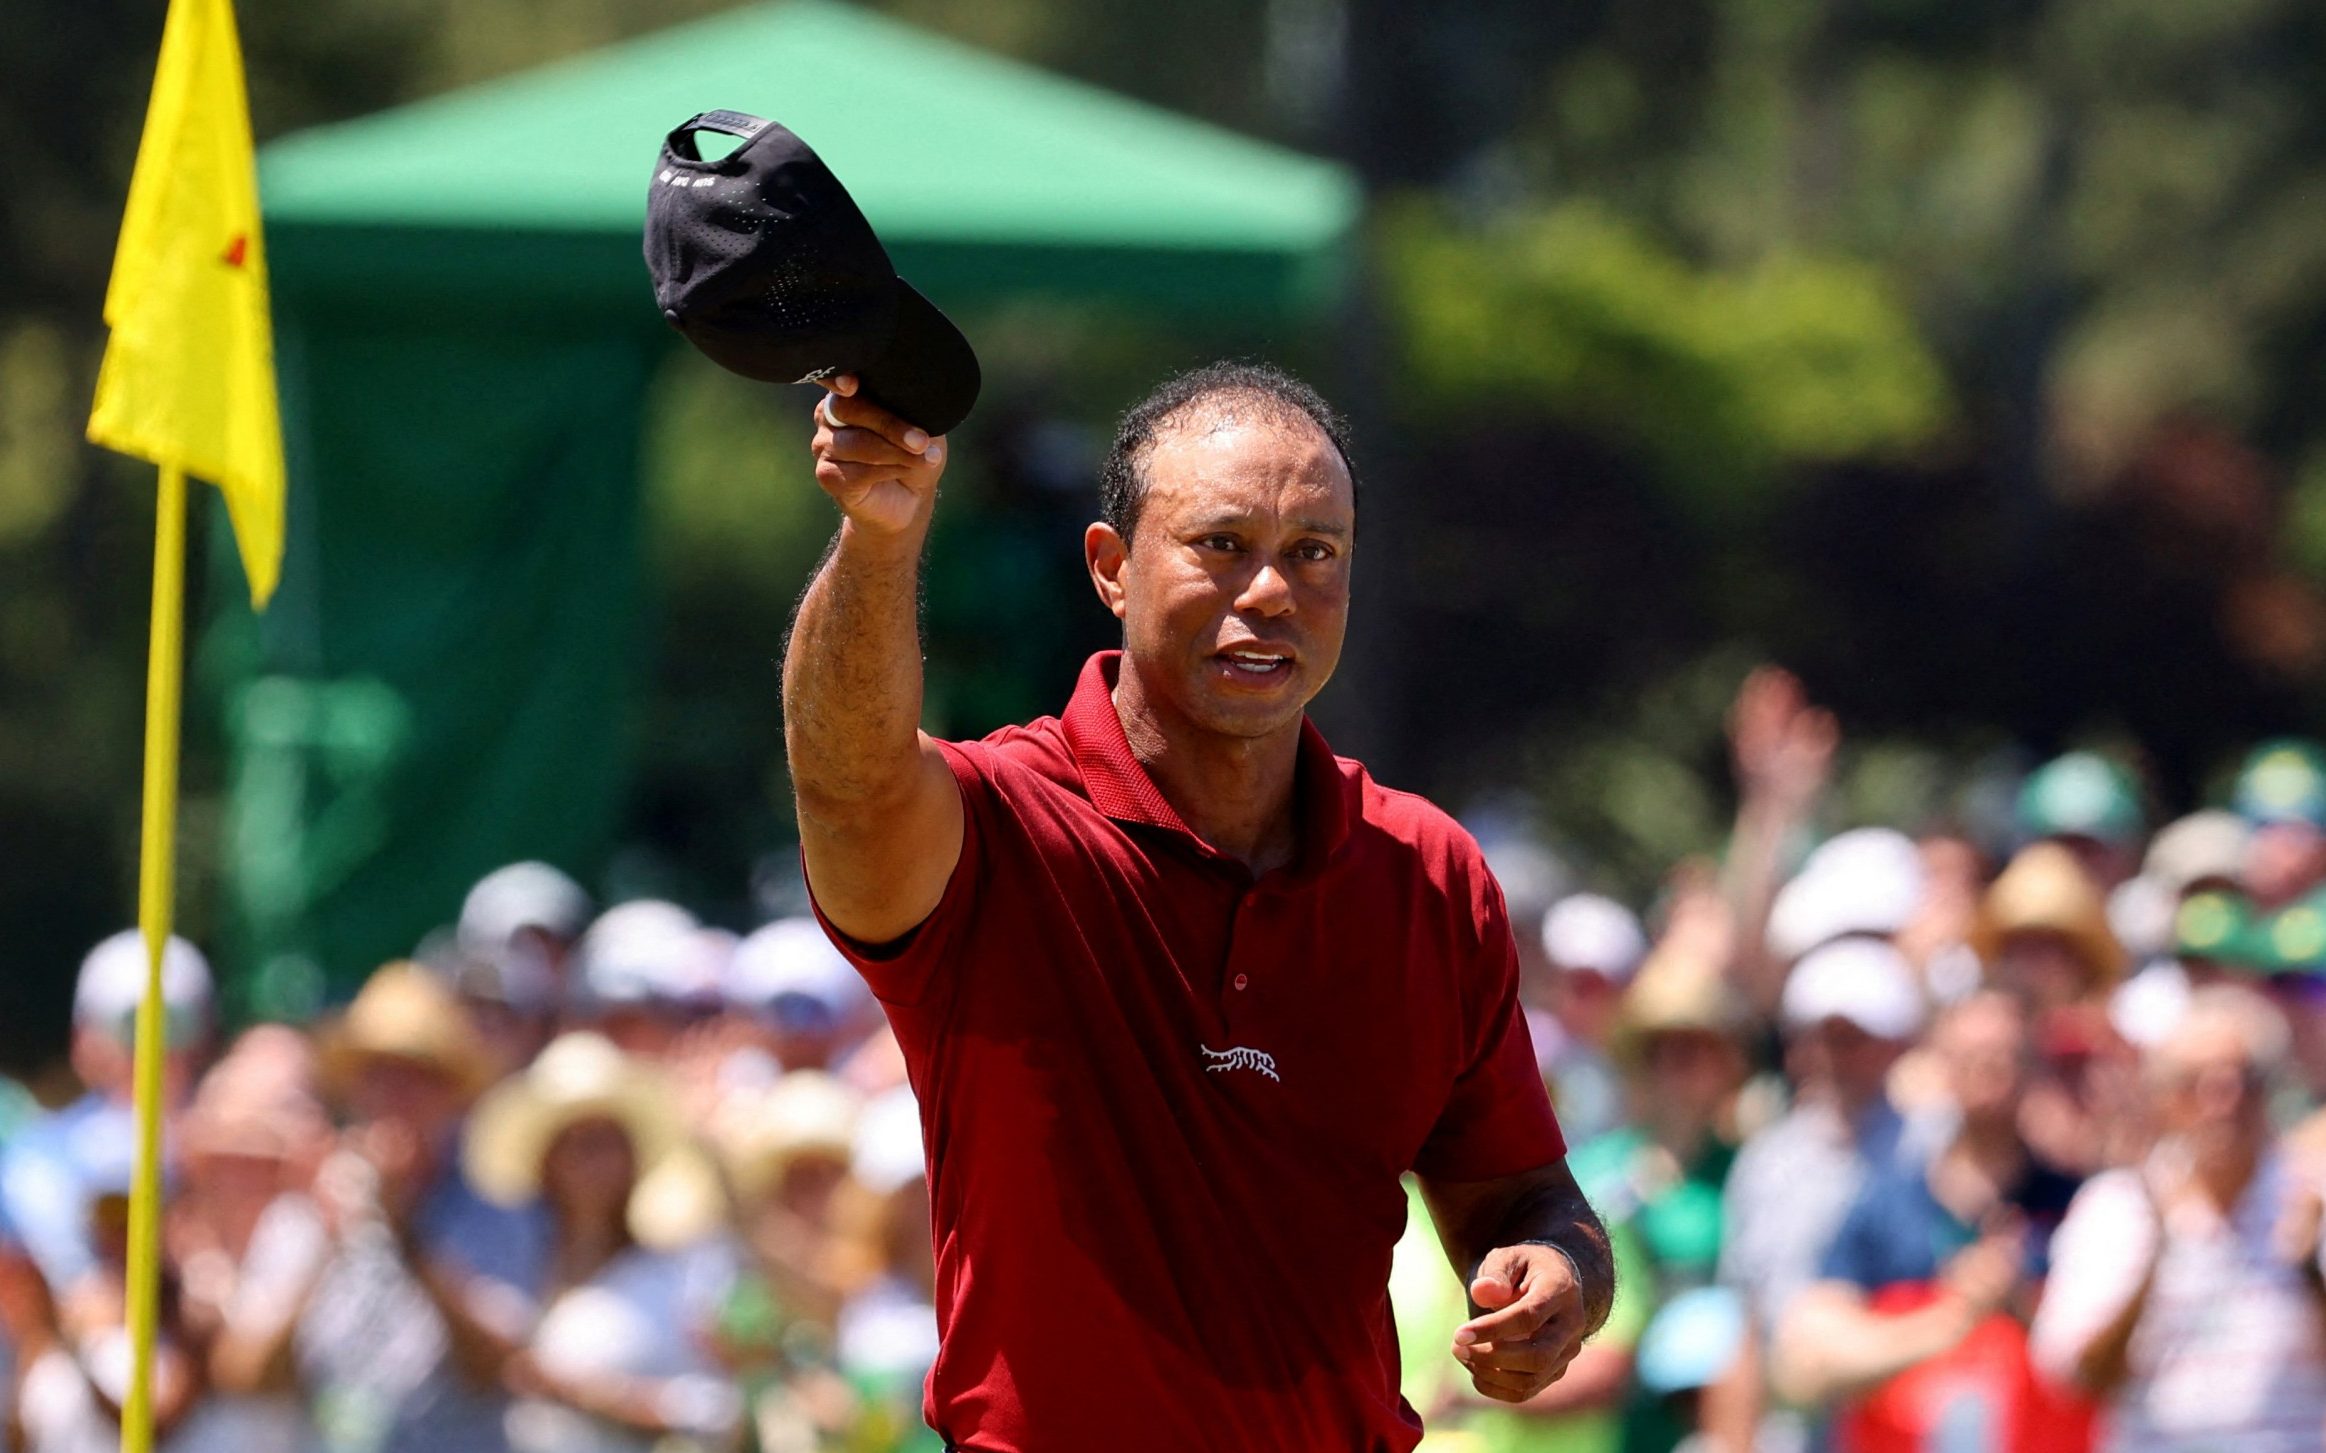 tiger woods finishes masters weekend dead last after resorting to swing tips from son, 15